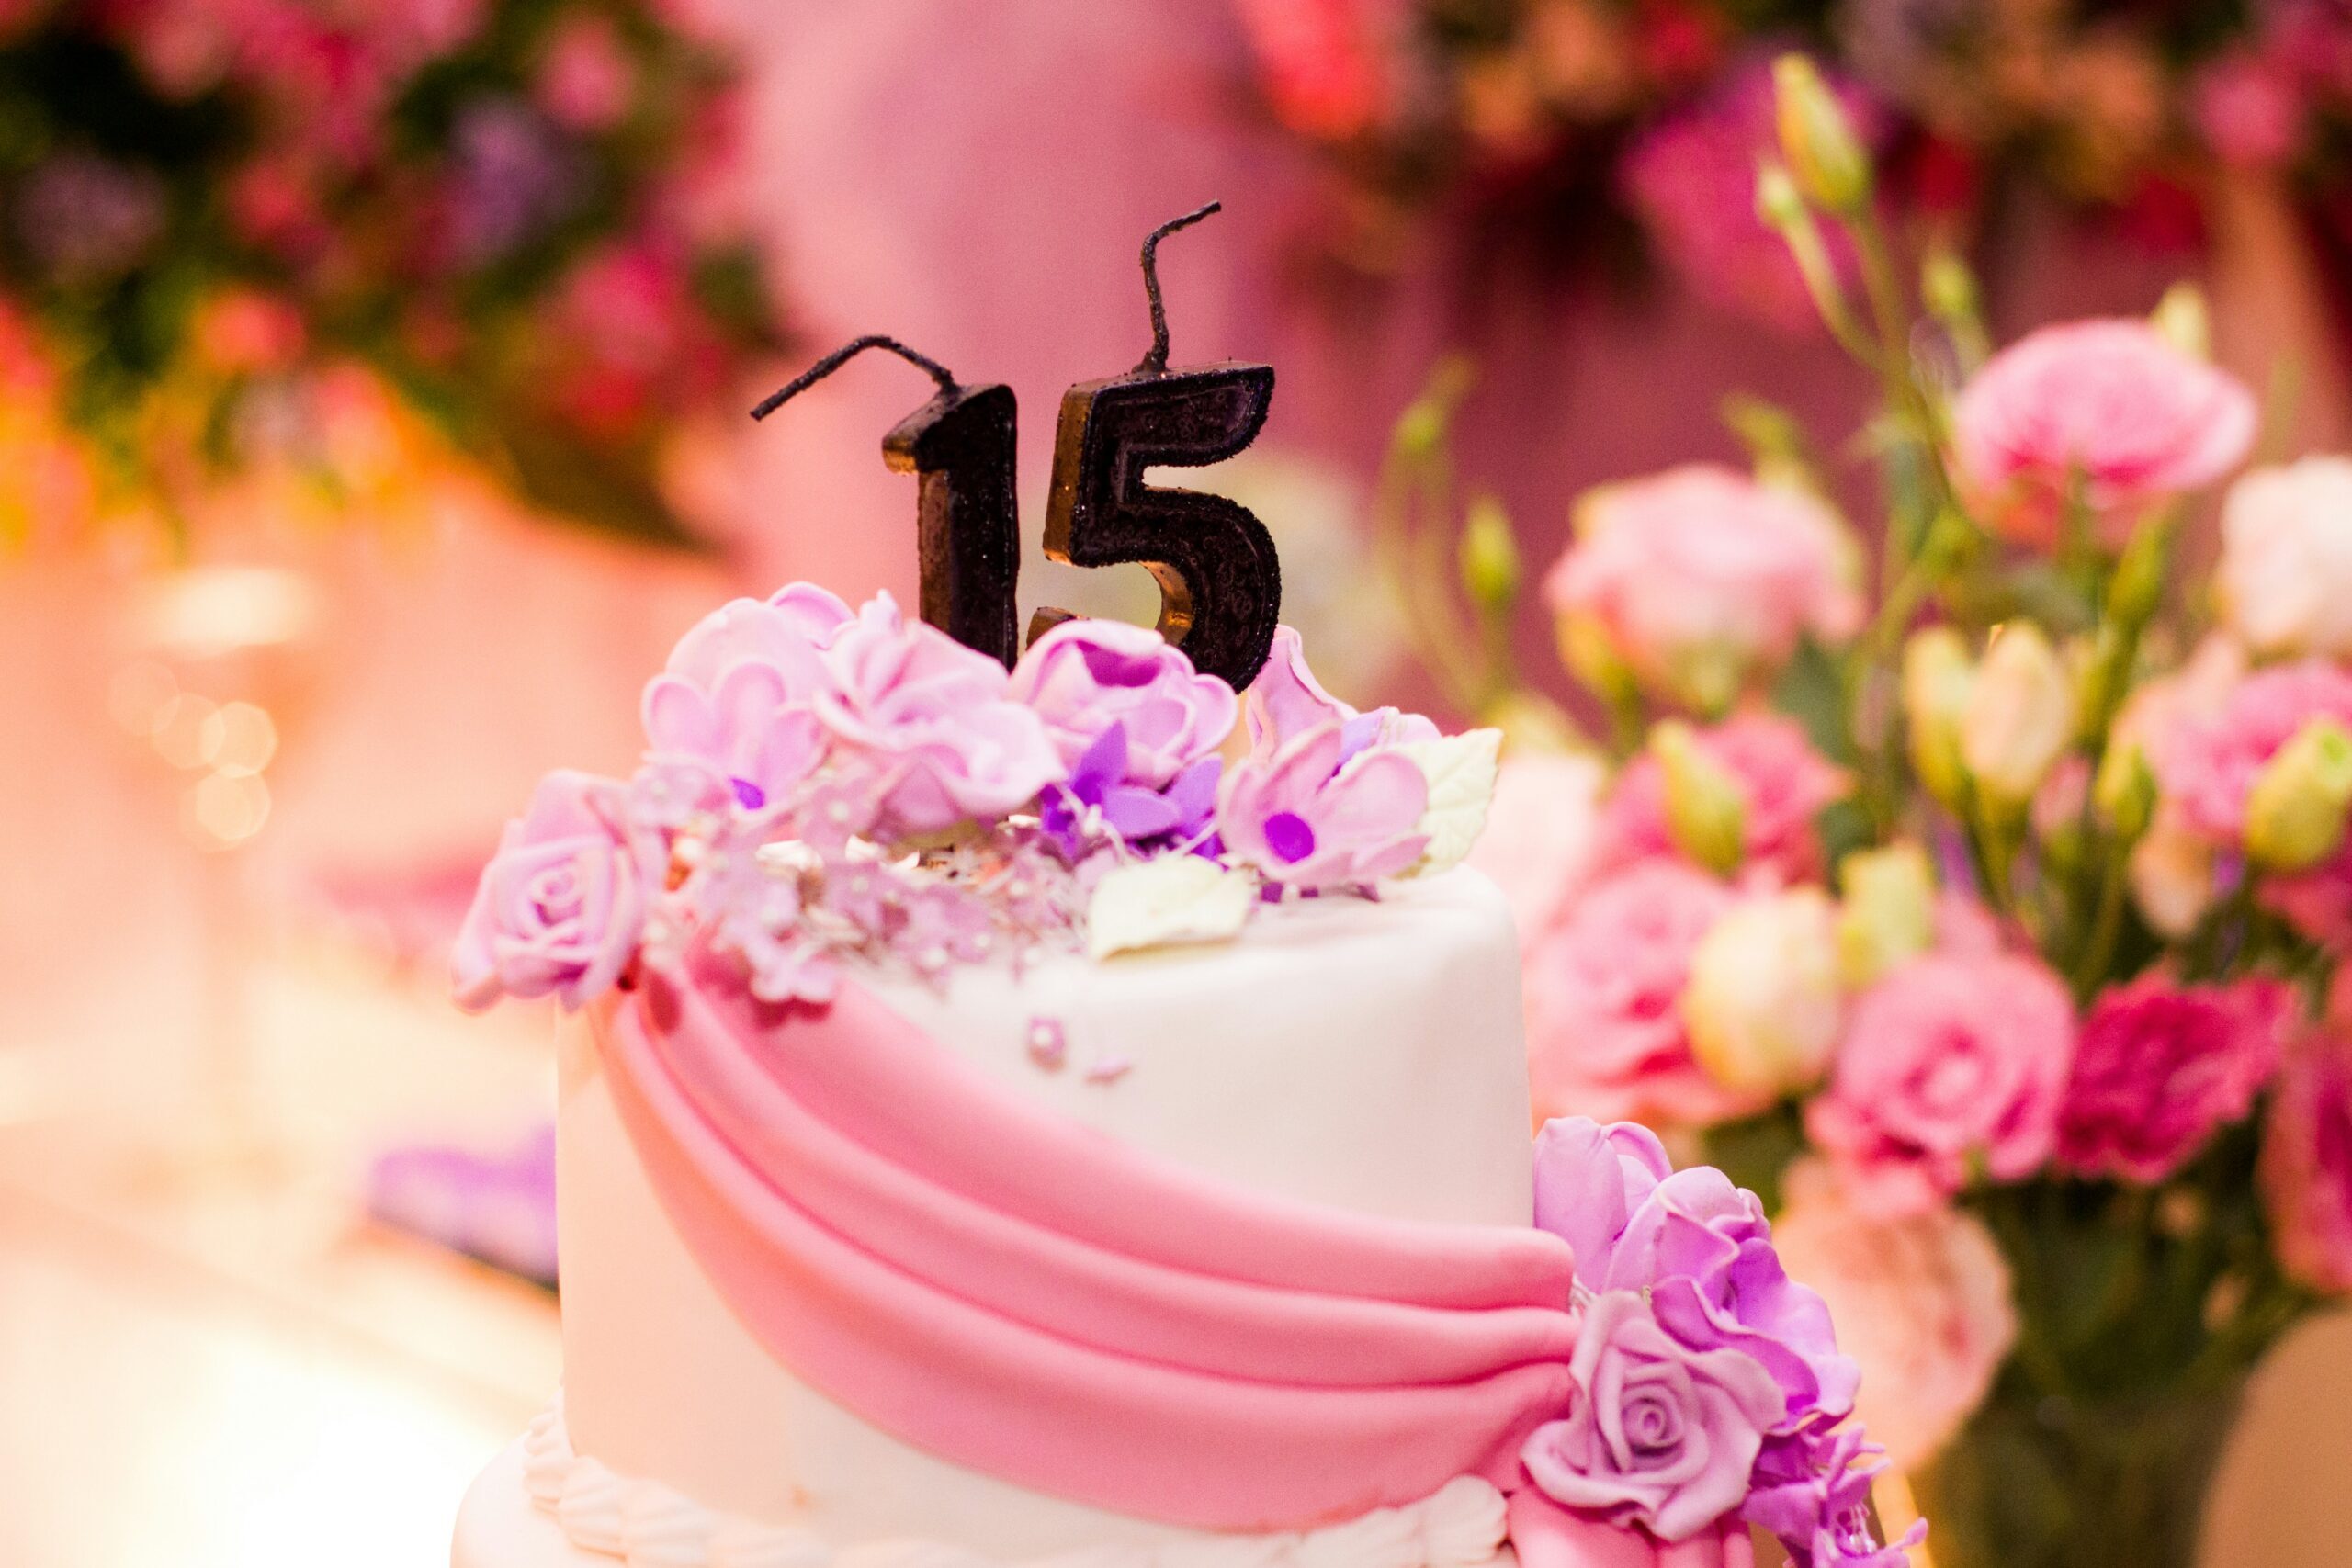 A pink birthday cake with a colourful birthday decoration.